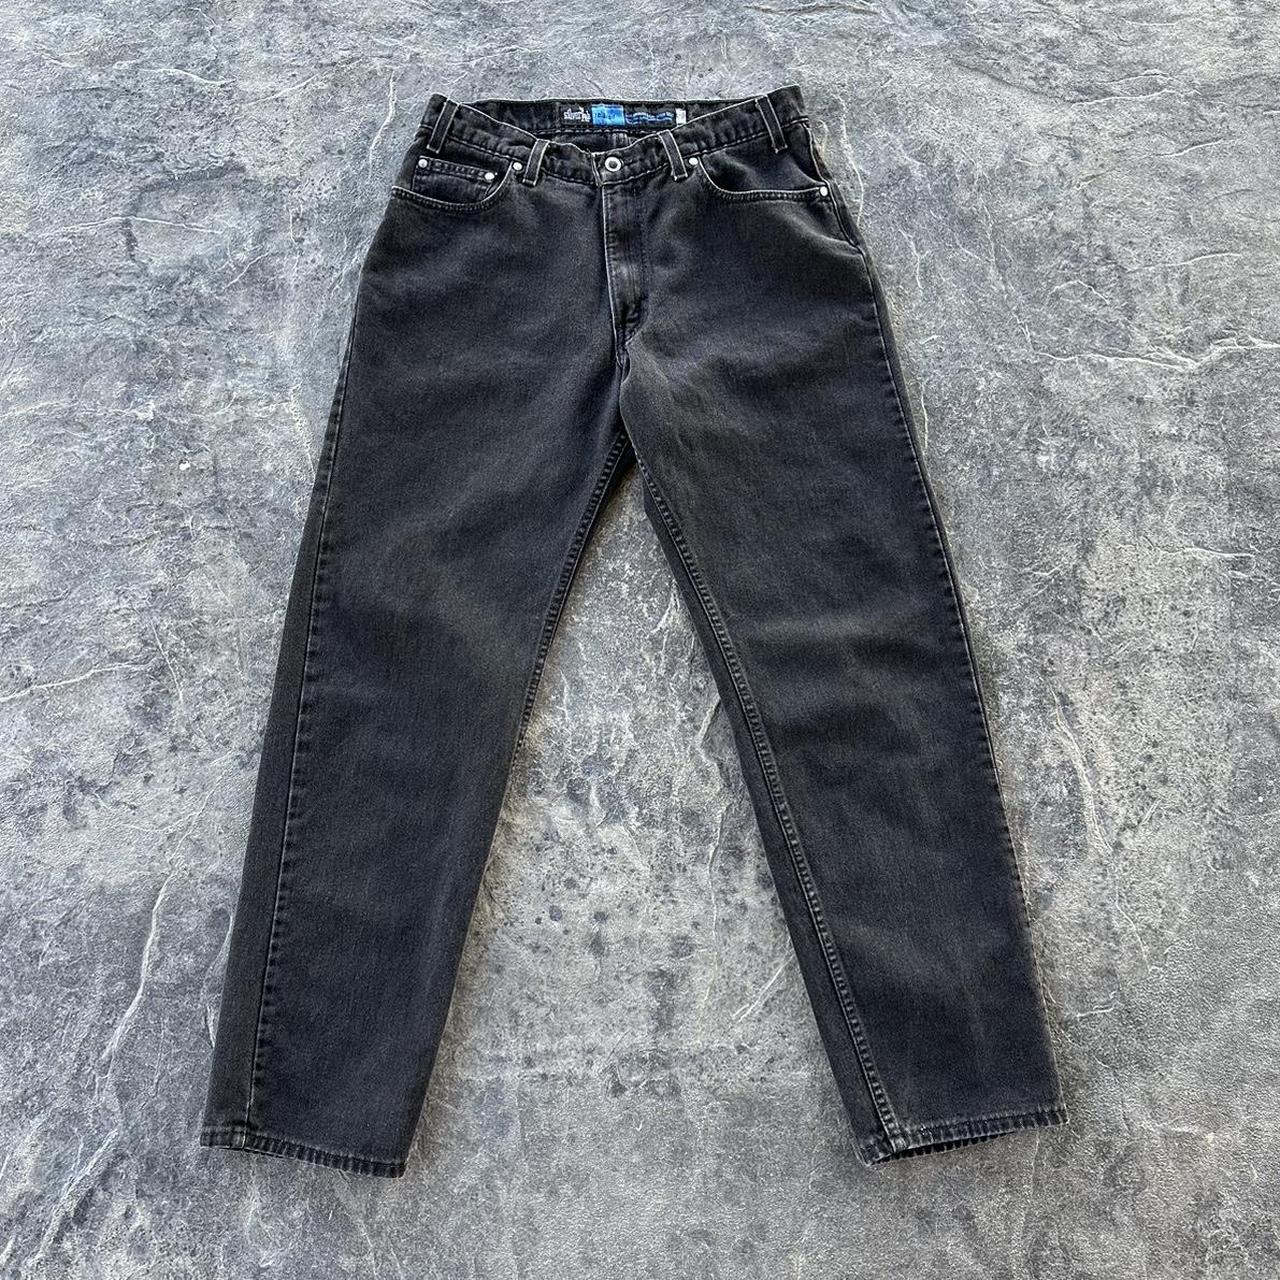 Levi’s Silvertab Relaxed Fit Jeans Black 90s Vintage... - Depop